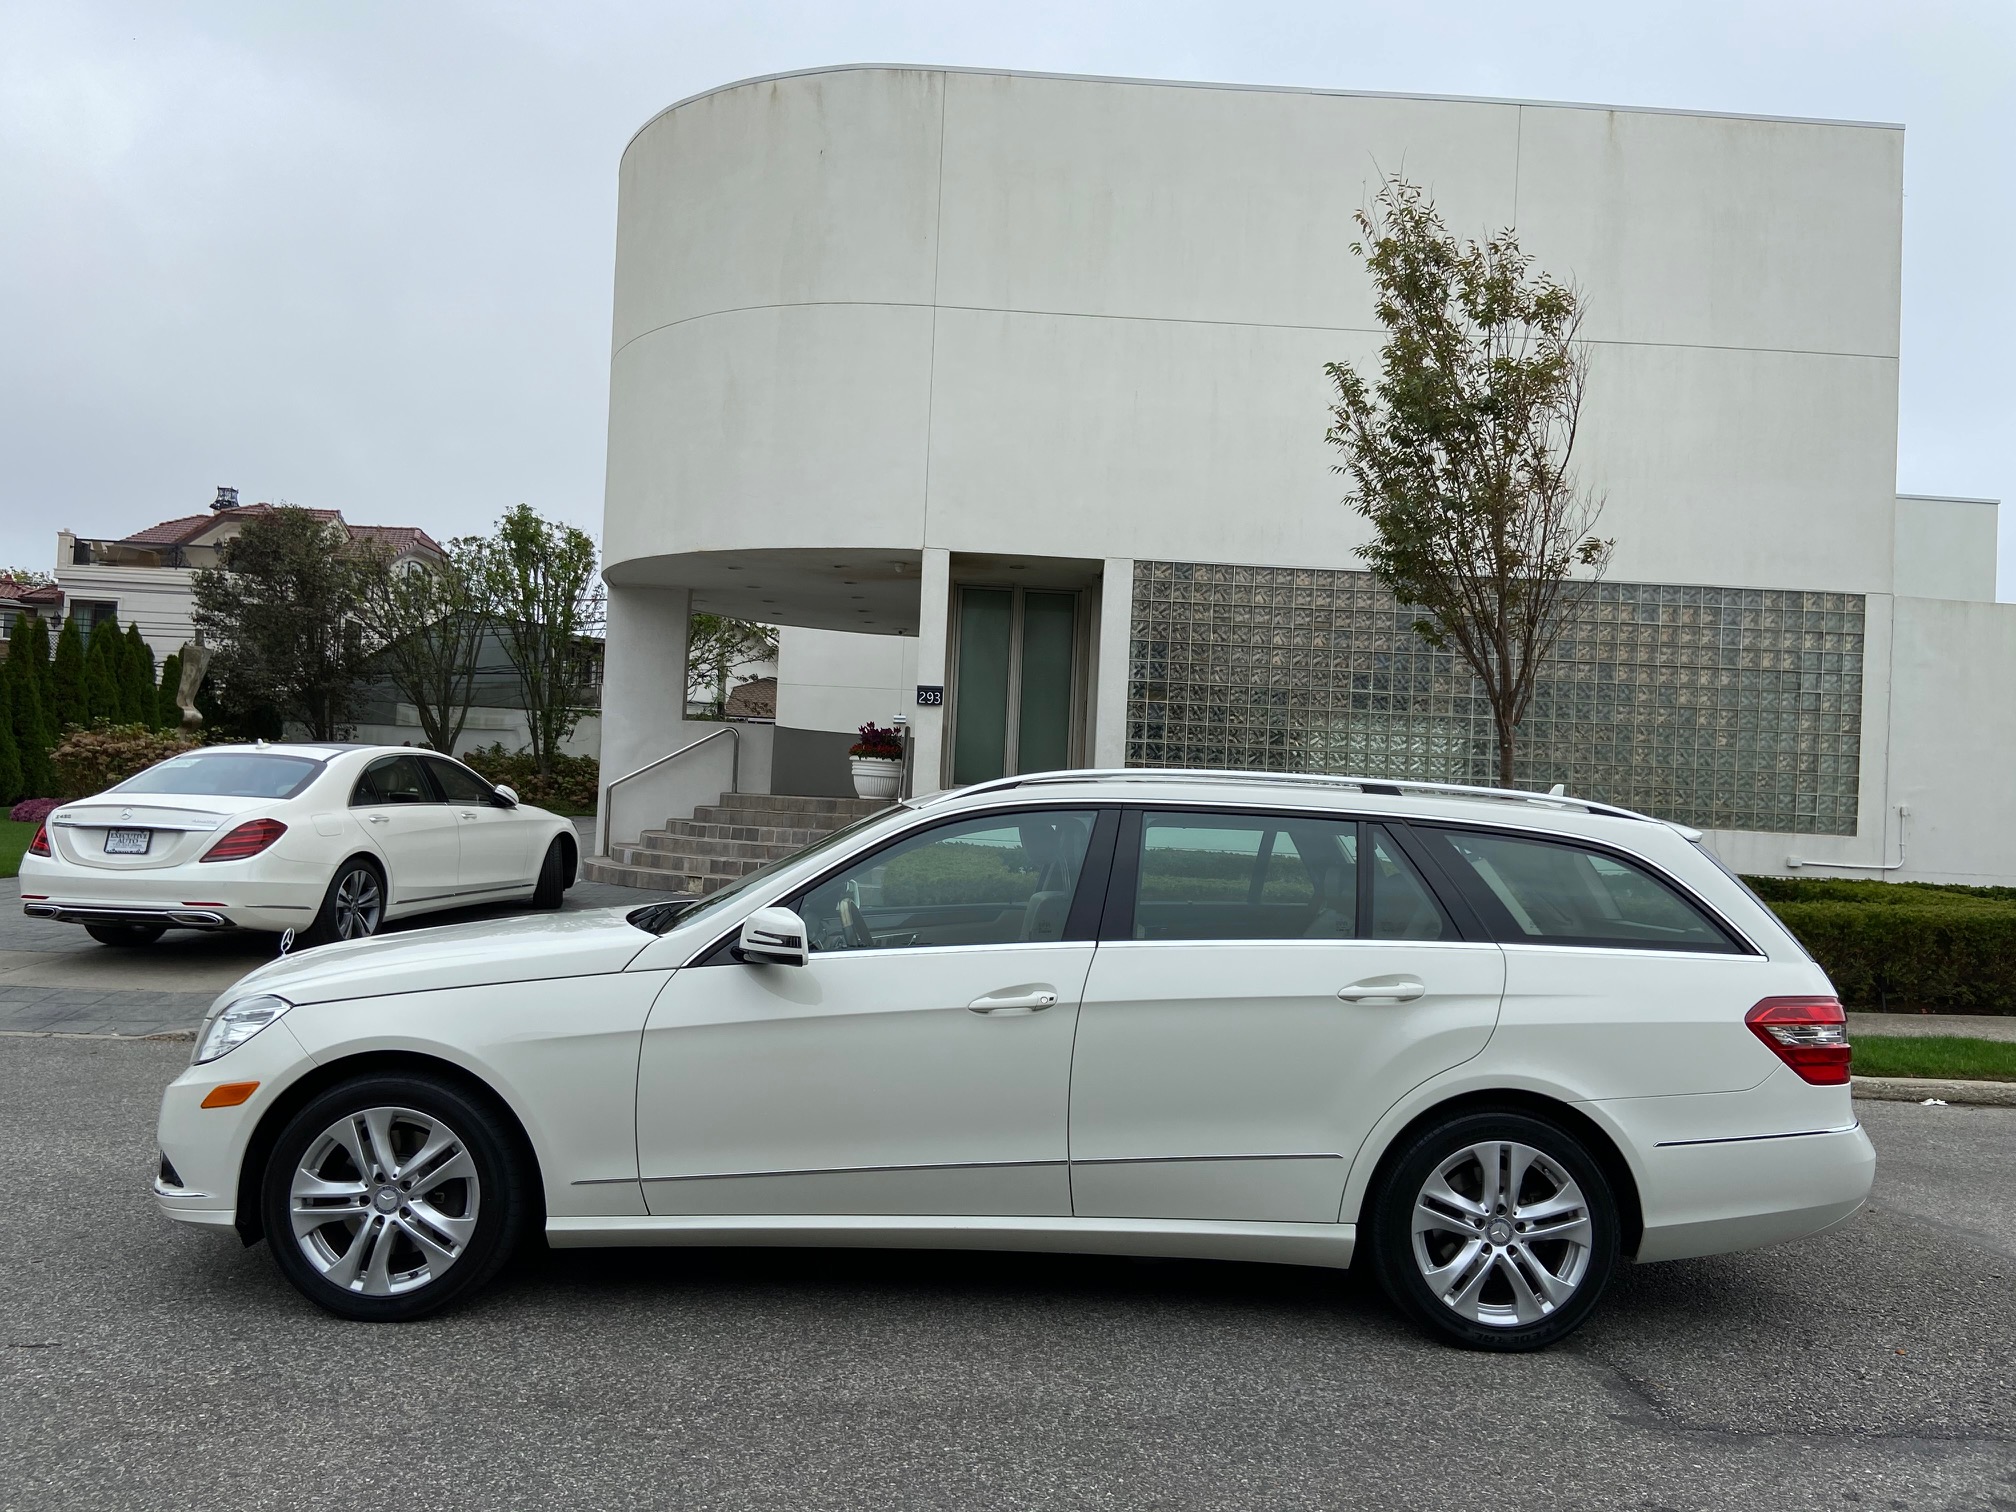 Used - Mercedes-Benz E350 Luxury 4MATIC AWD Wagon for sale in Staten Island NY